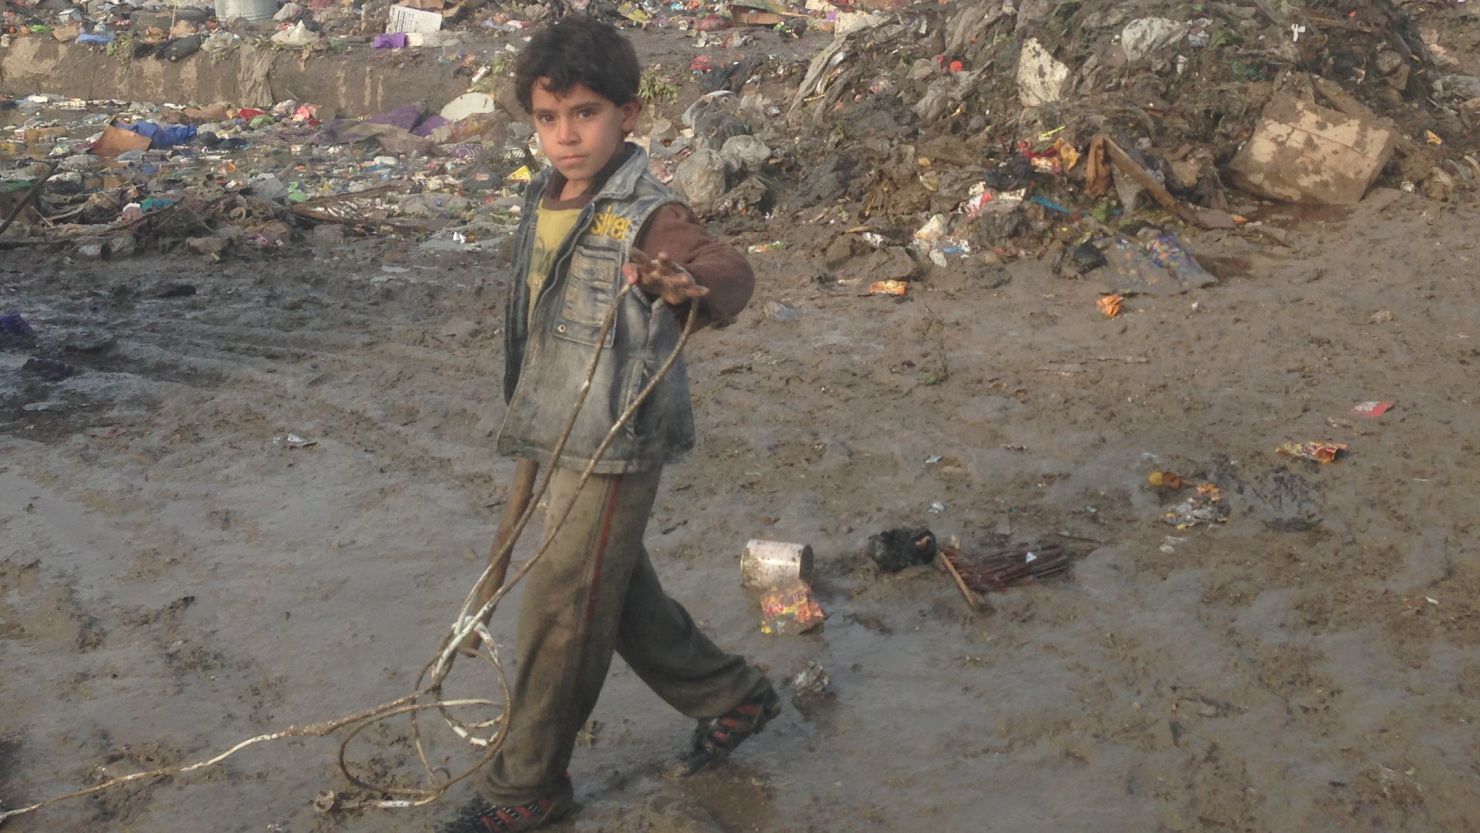 A young boy searches through refuse for sellable items in a garbage dump in Sadr City, Iraq